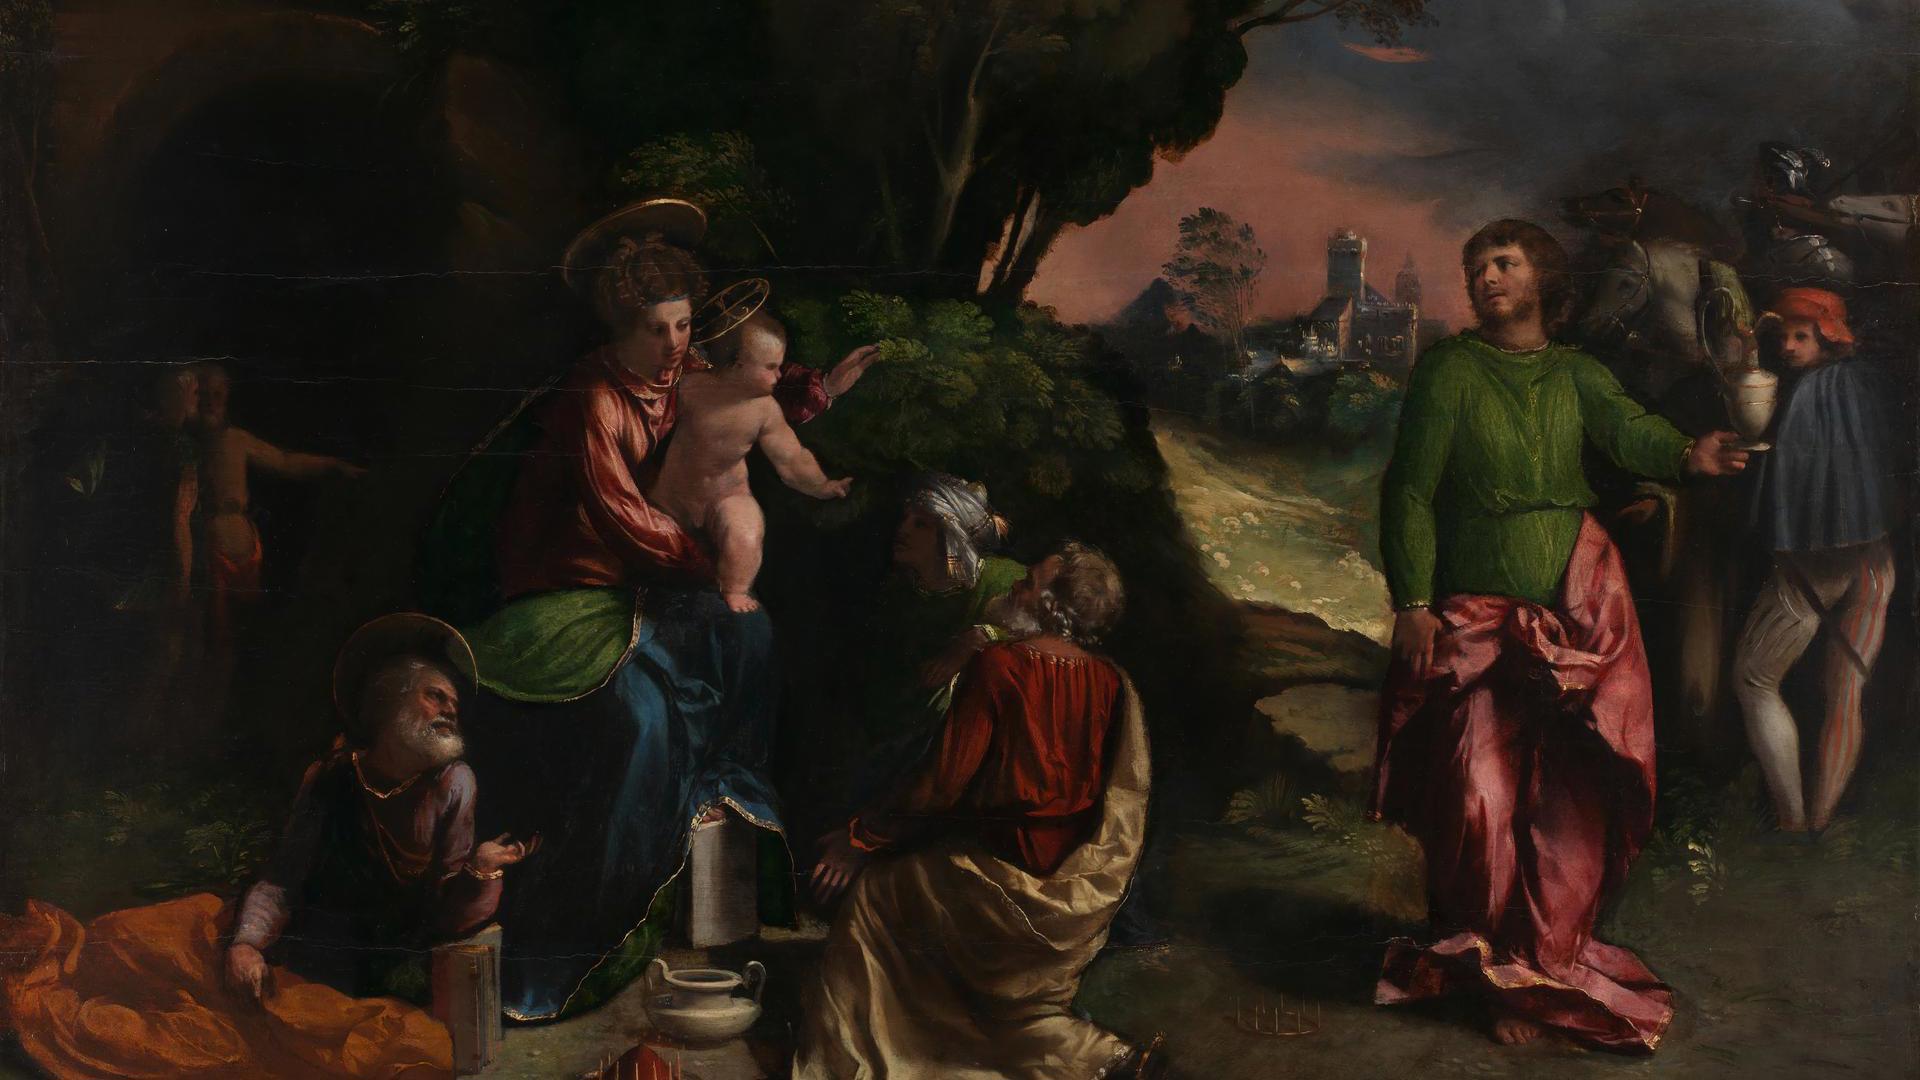 The Adoration of the Kings by Dosso Dossi